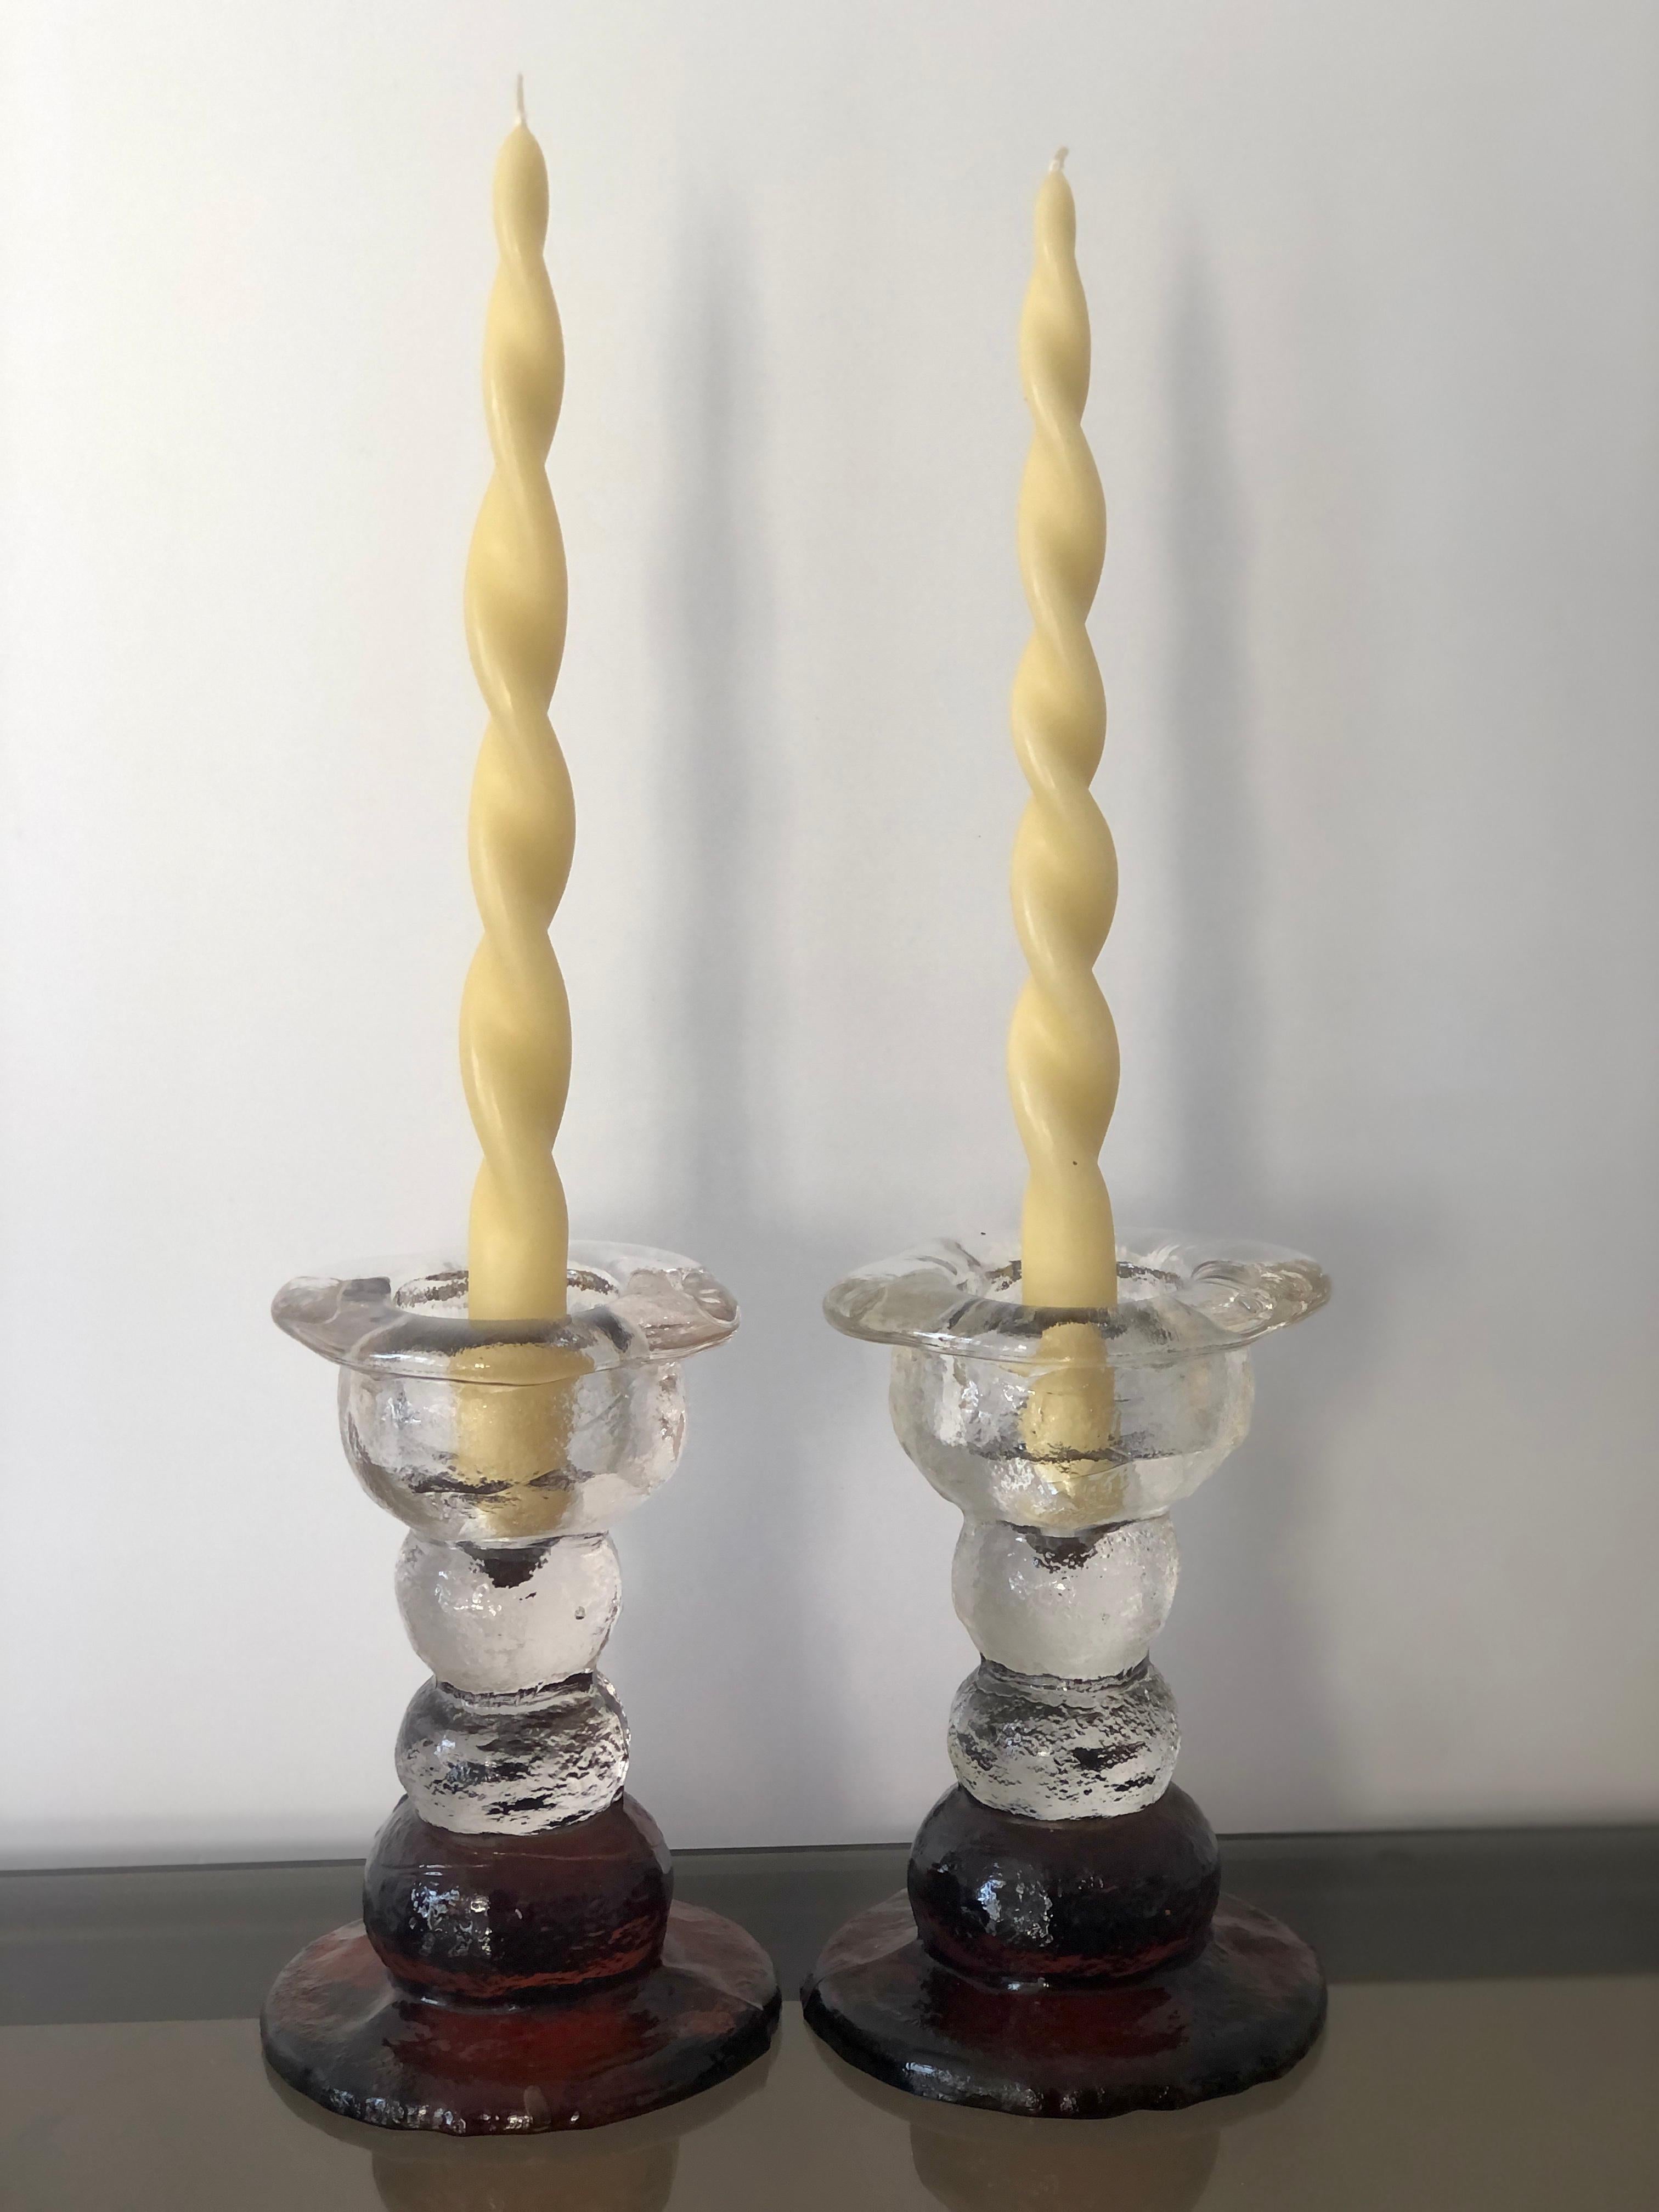 Finnish 1970s Brutalist Candlesticks by Pertti Santalahti for Humppila, Finland For Sale